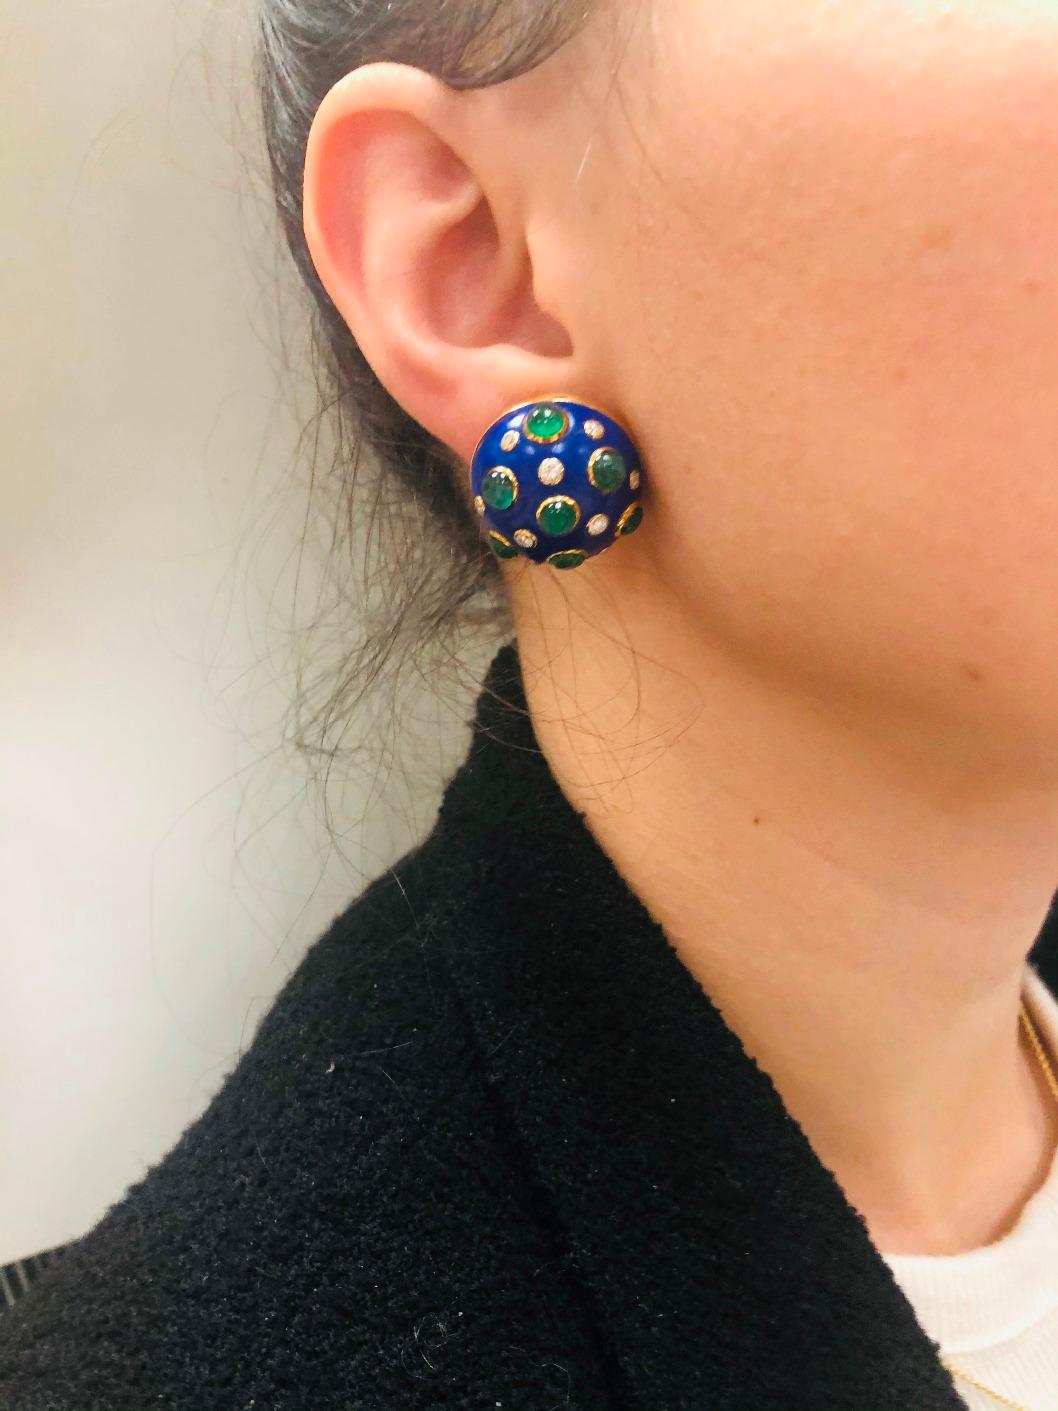 Colorful and wearable earrings created by Trianon in the 1970s. 
Made of 18 karat yellow gold, lapis lazuli, bezel set cabochon emeralds and round brilliant cut diamonds (G-H color, VS clarity, approximately 1.0 carat total weight).
Measurements: 1